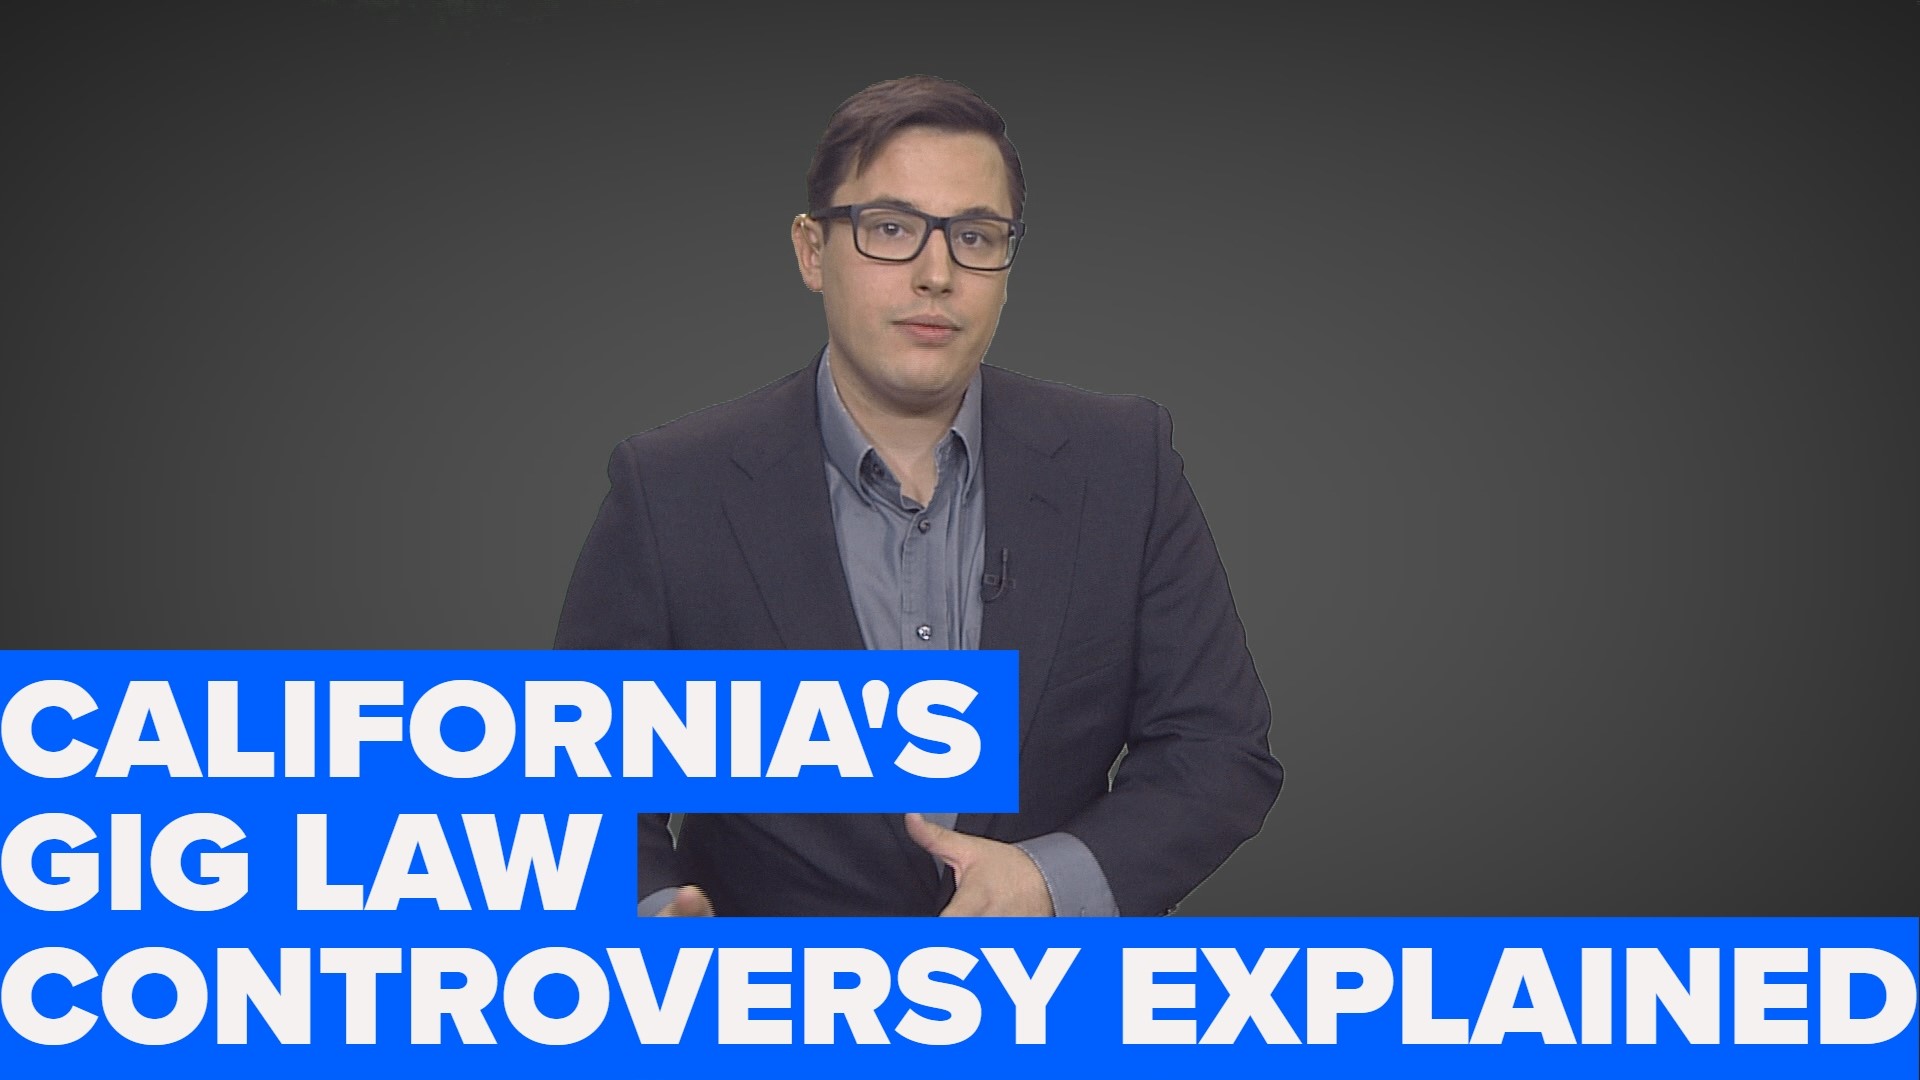 Giacomo Luca breaks down the controversy and legal fight over AB5, California's new labor law effecting contract workers from Uber drivers to strippers.